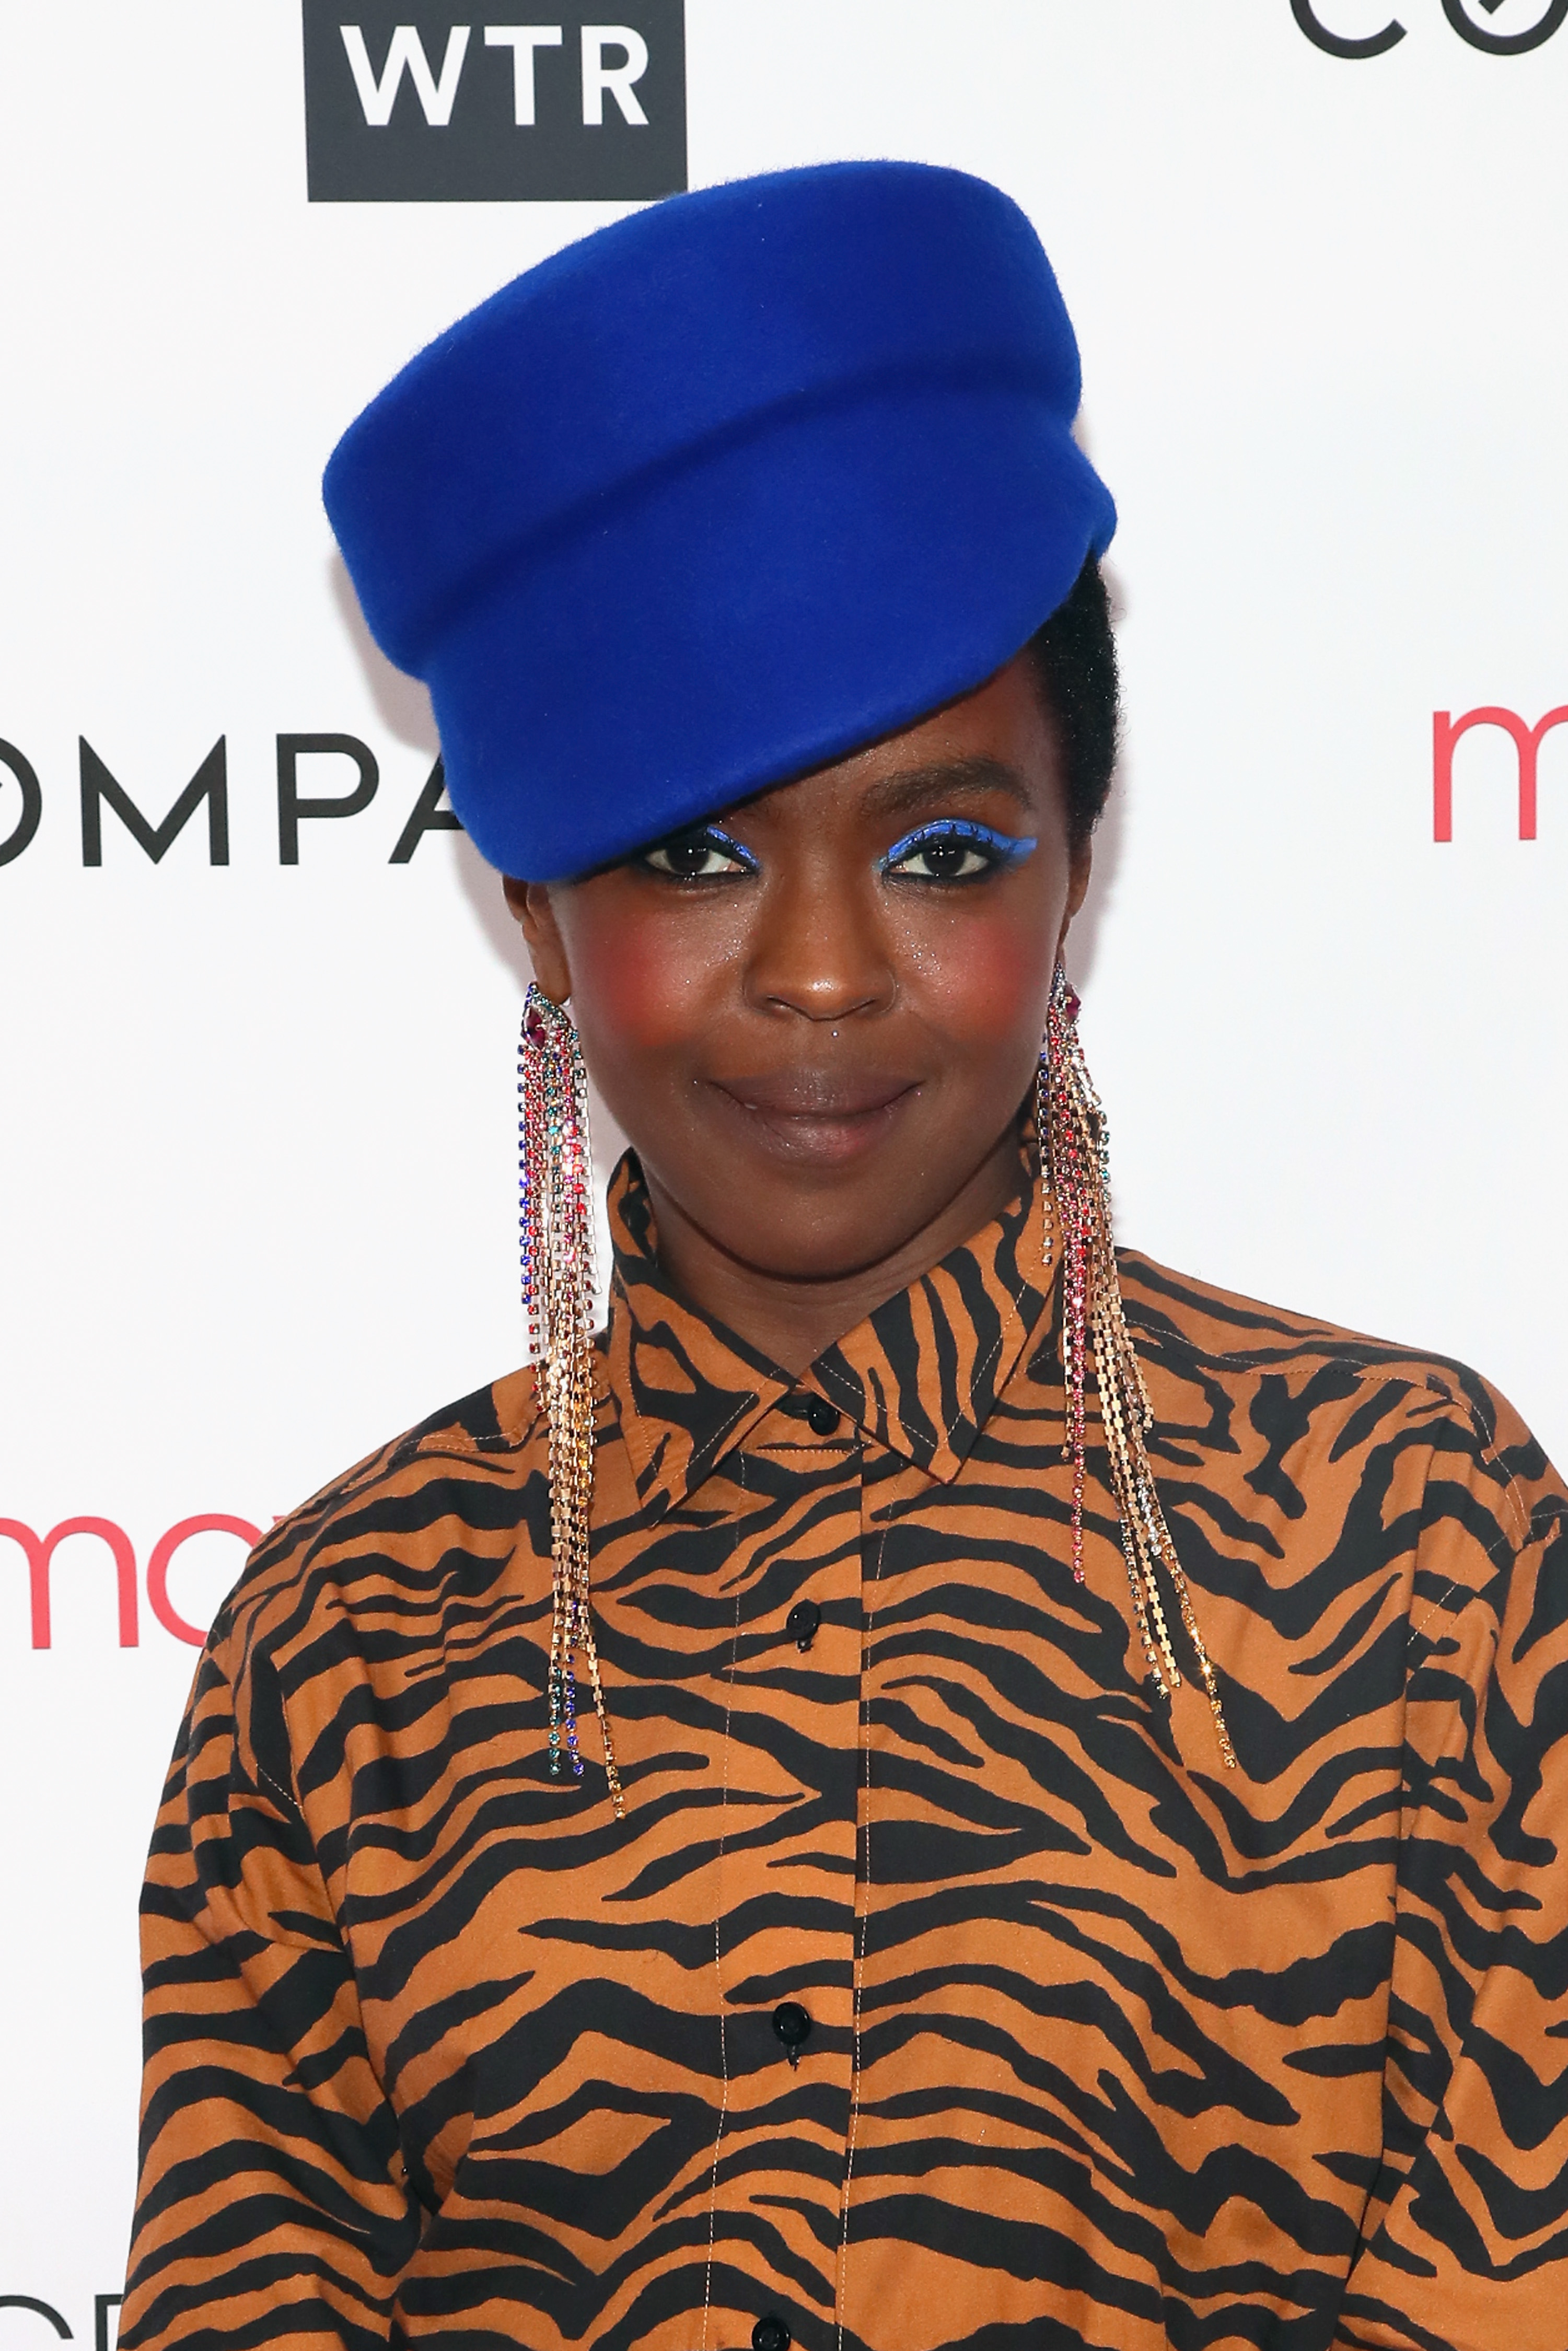 Lauryn Hill Clears Up All the Rumors You've Heard About Her